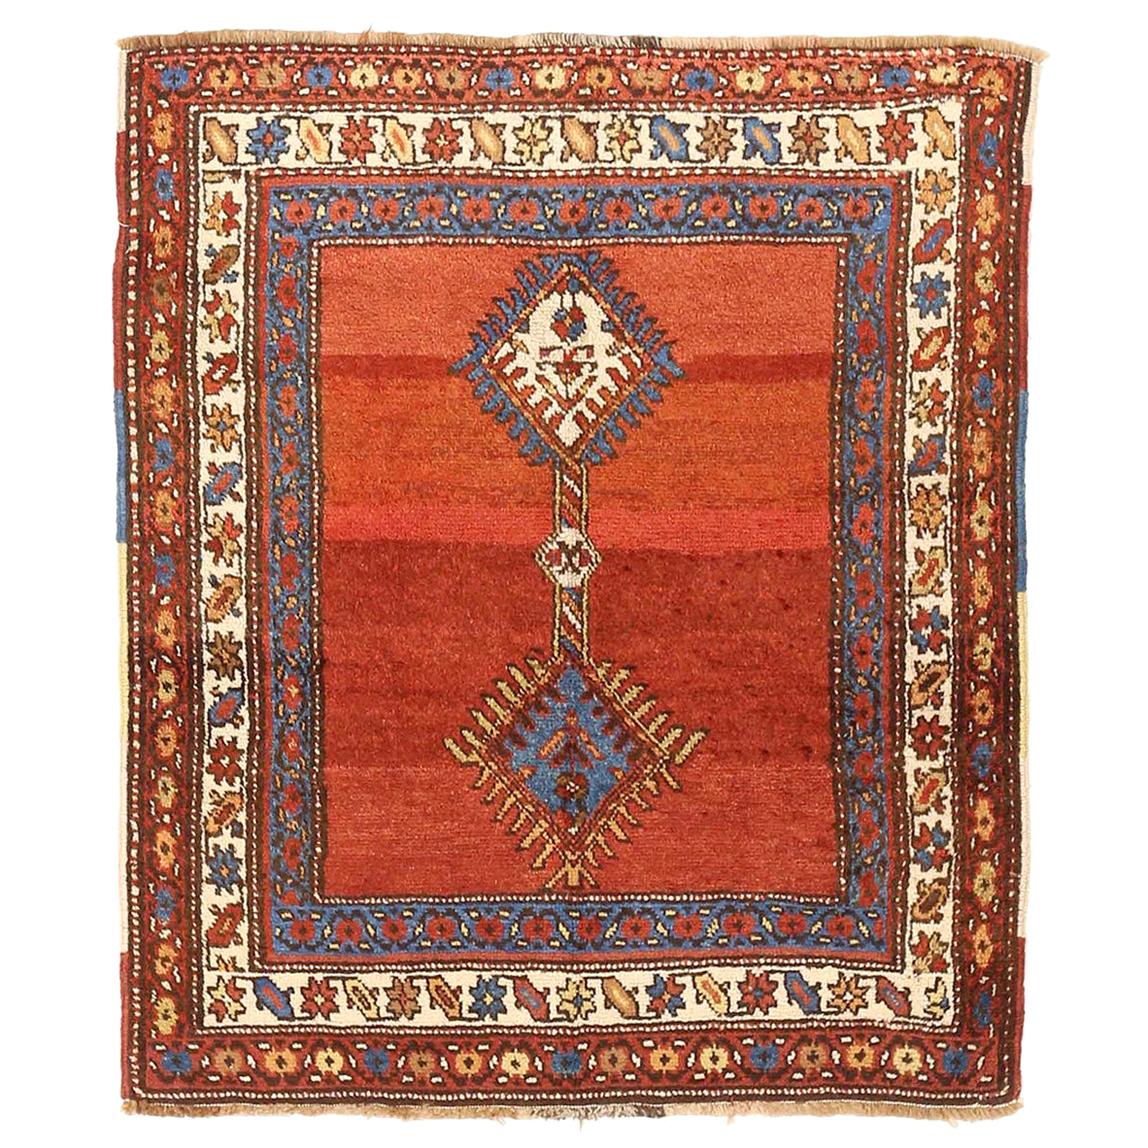 Antique Persian Azerbaijan Rug with Blue and Red Floral Details on Ivory Field